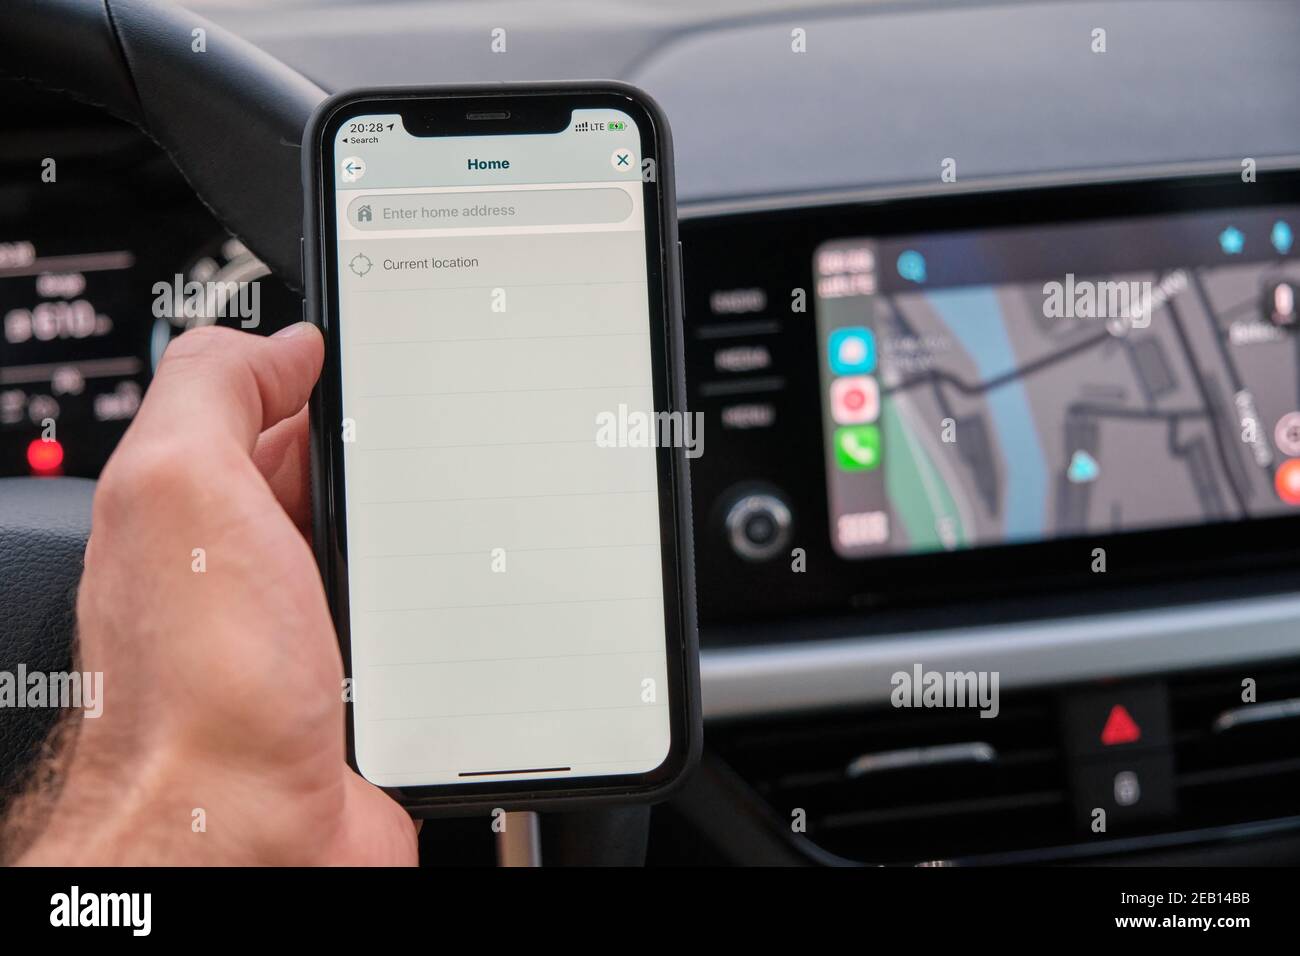 Male hand, iPhone connecting to infotainment system, Apple CarPlay,  display, touchscreen, dashboard, car, Peugeot 308 Stock Photo - Alamy